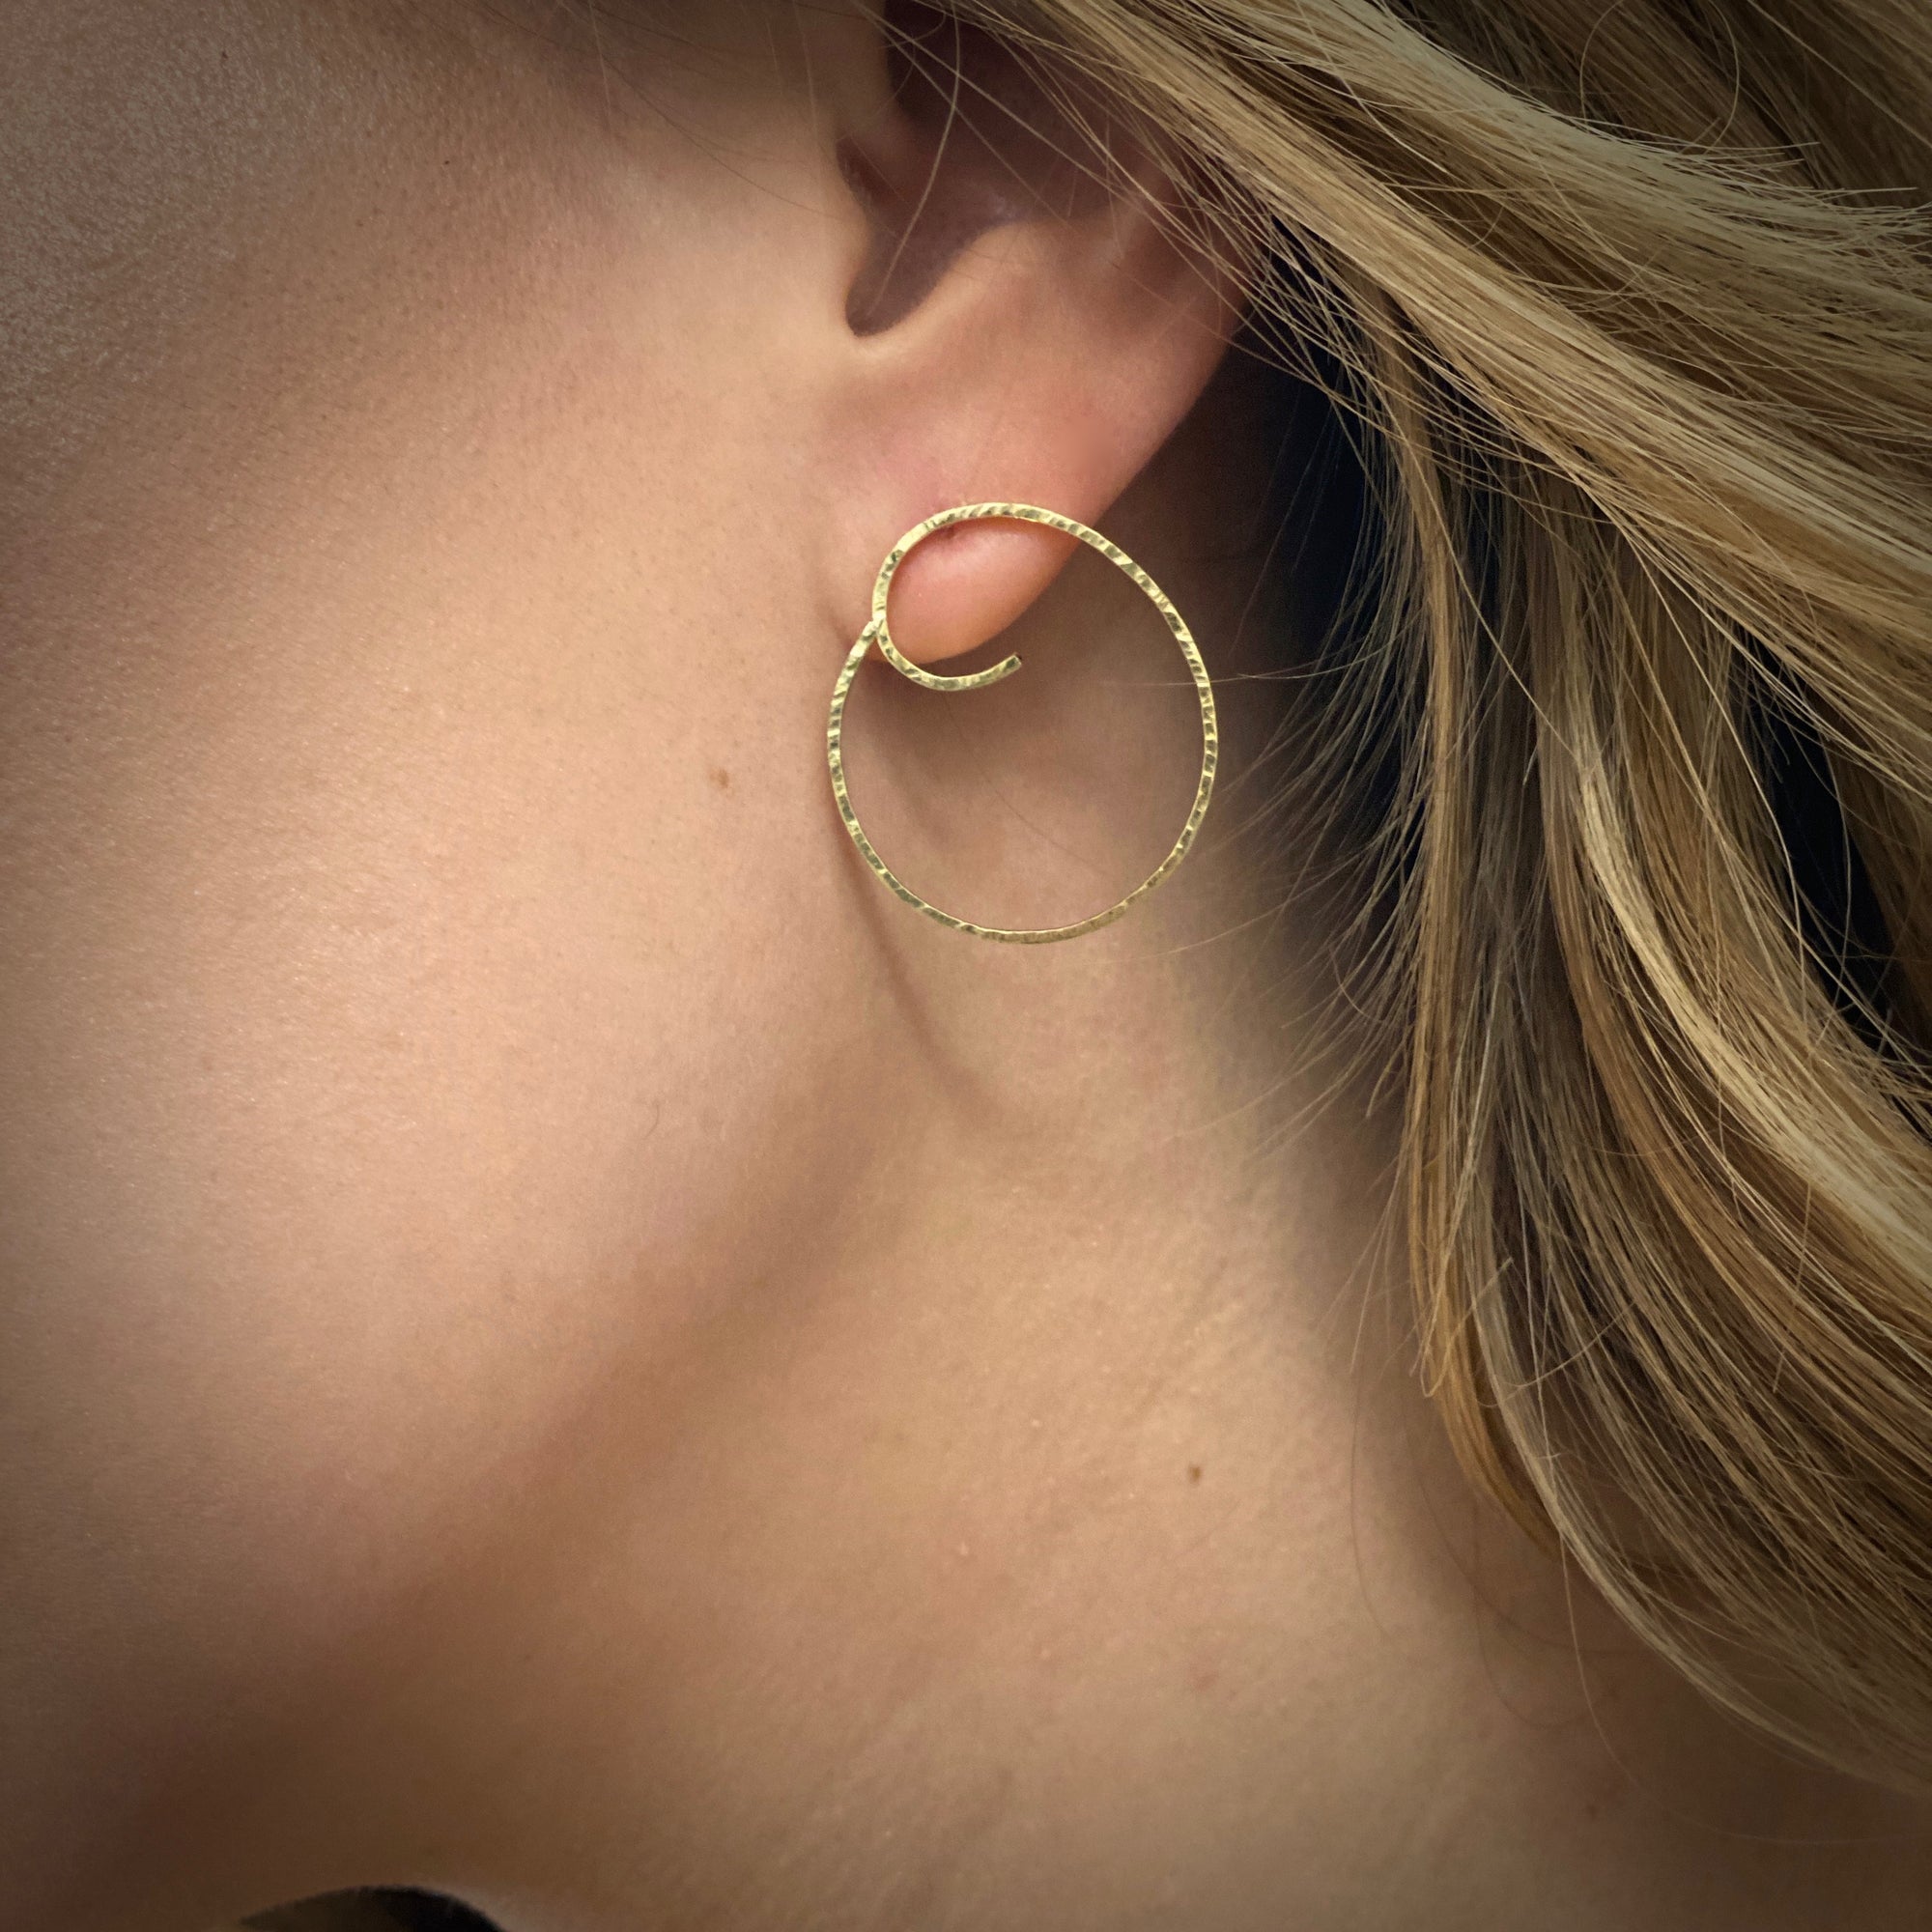 Simple spiral earrings in 18K yellow gold